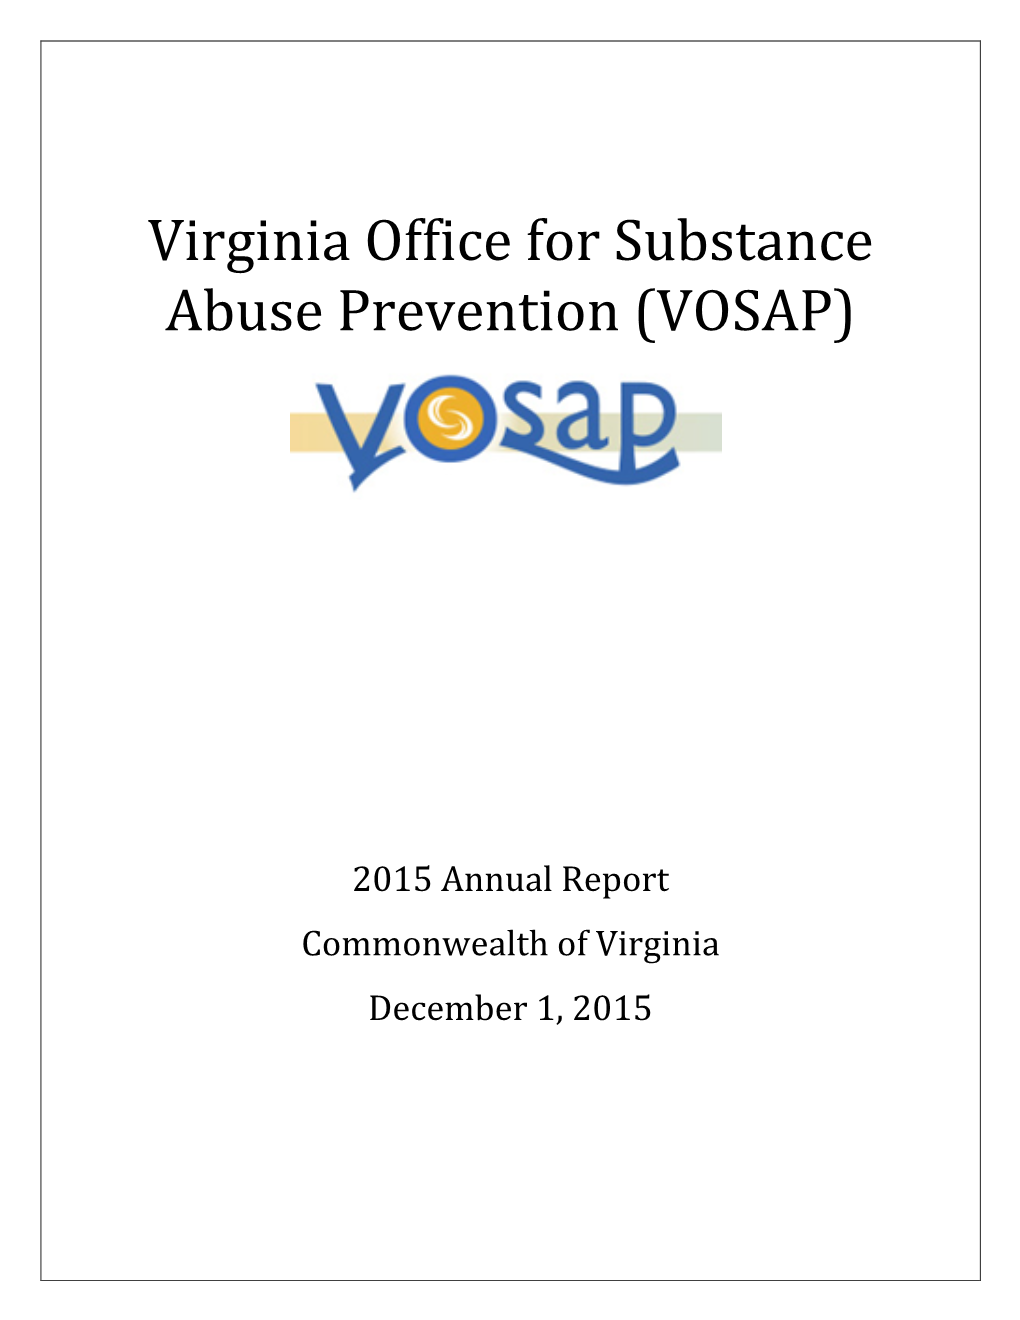 Virginia Office for Substance Abuse Prevention (VOSAP)